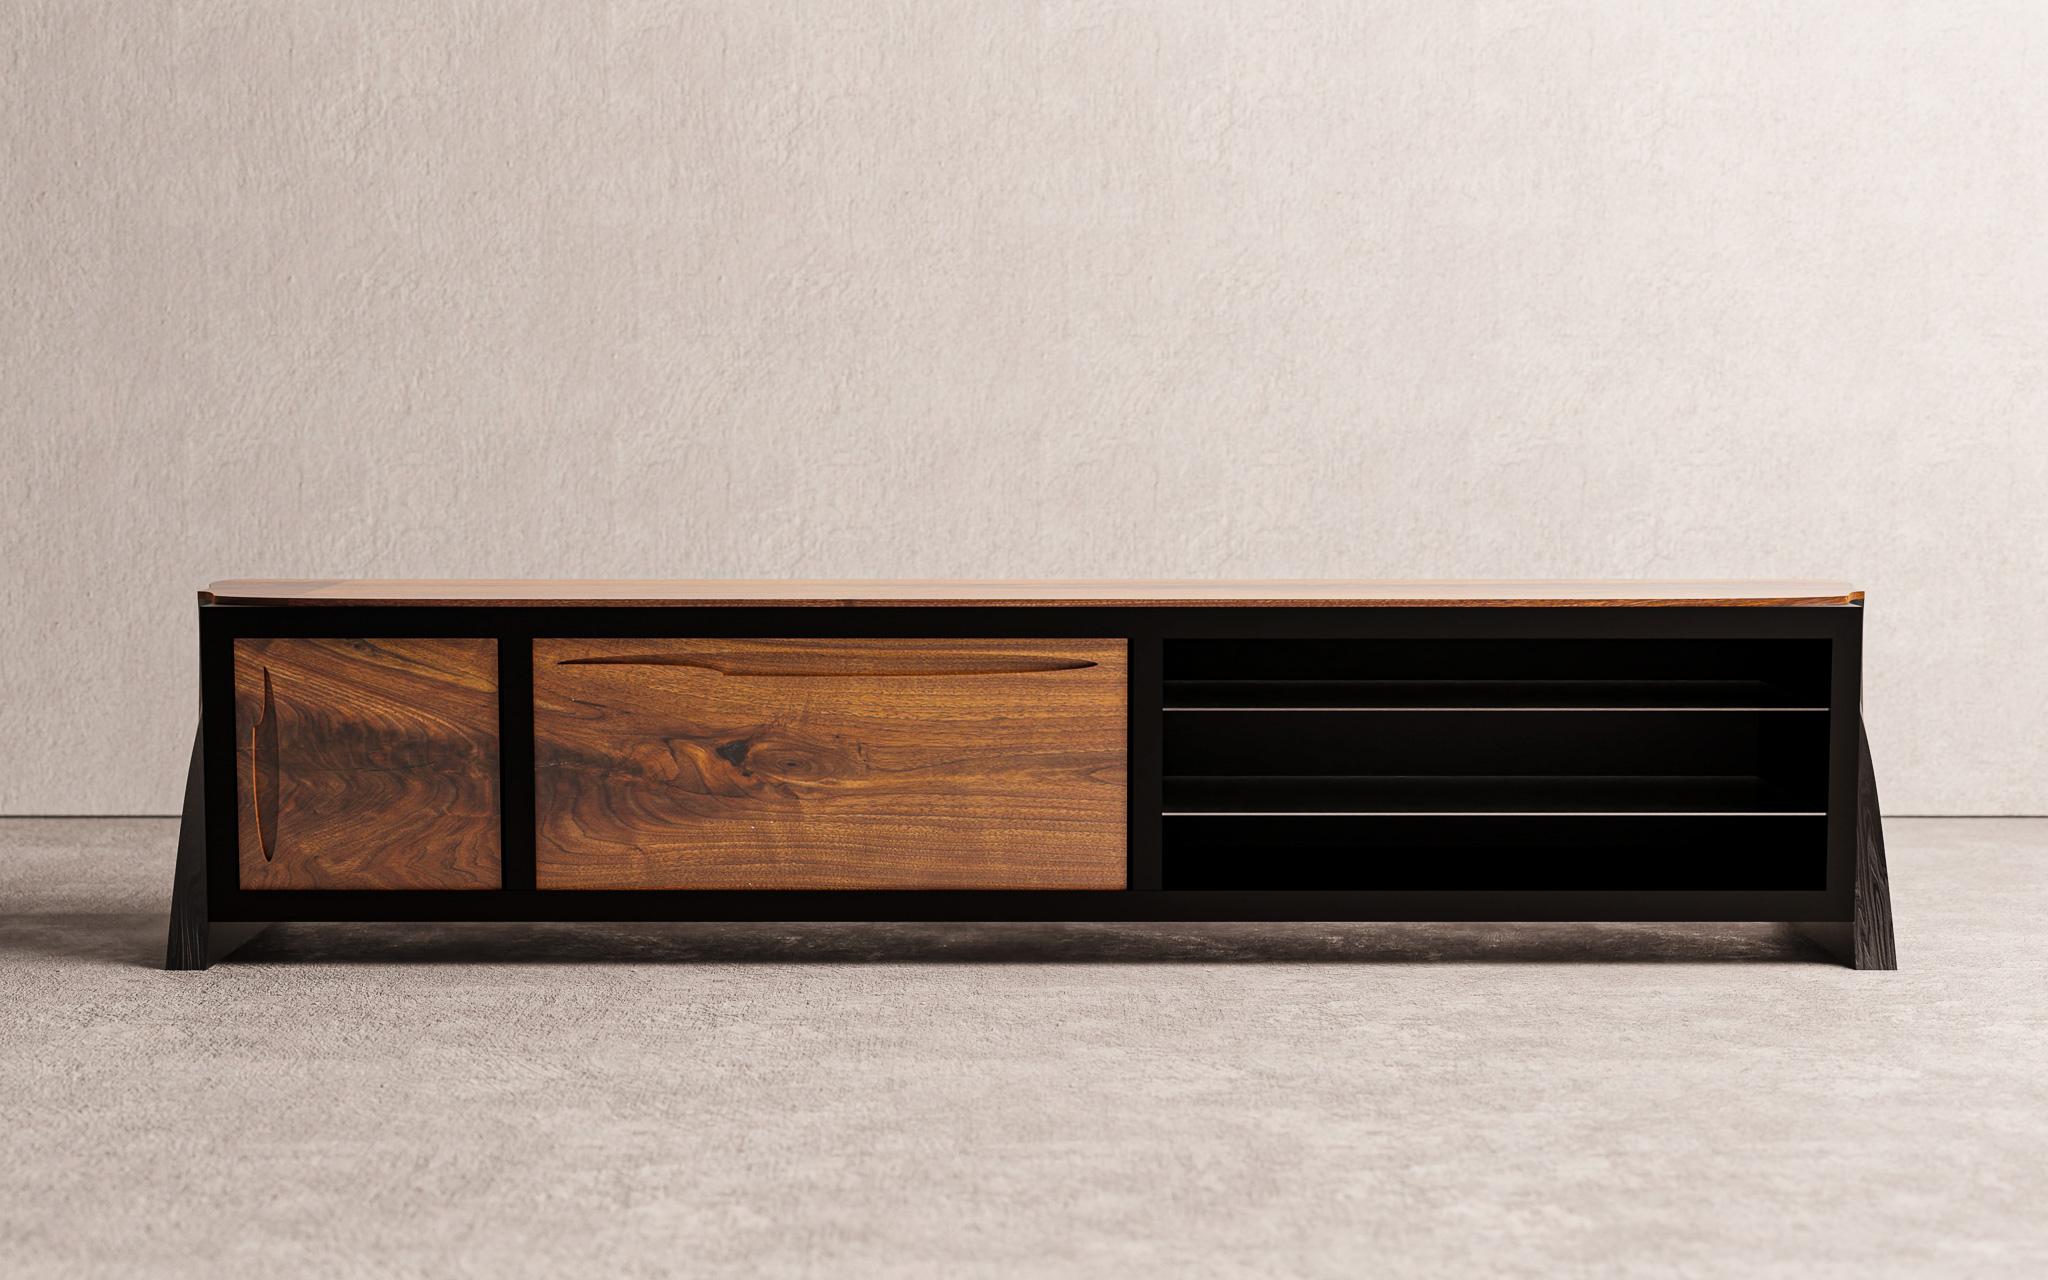 The Presidio sideboard by Christopher Mark is a hand crafted one of one piece. The frame of the work is constructed with white oak that has been charred with a Shou Sugi Ban technique that emphasizes the natural grain. Sideboard includes two